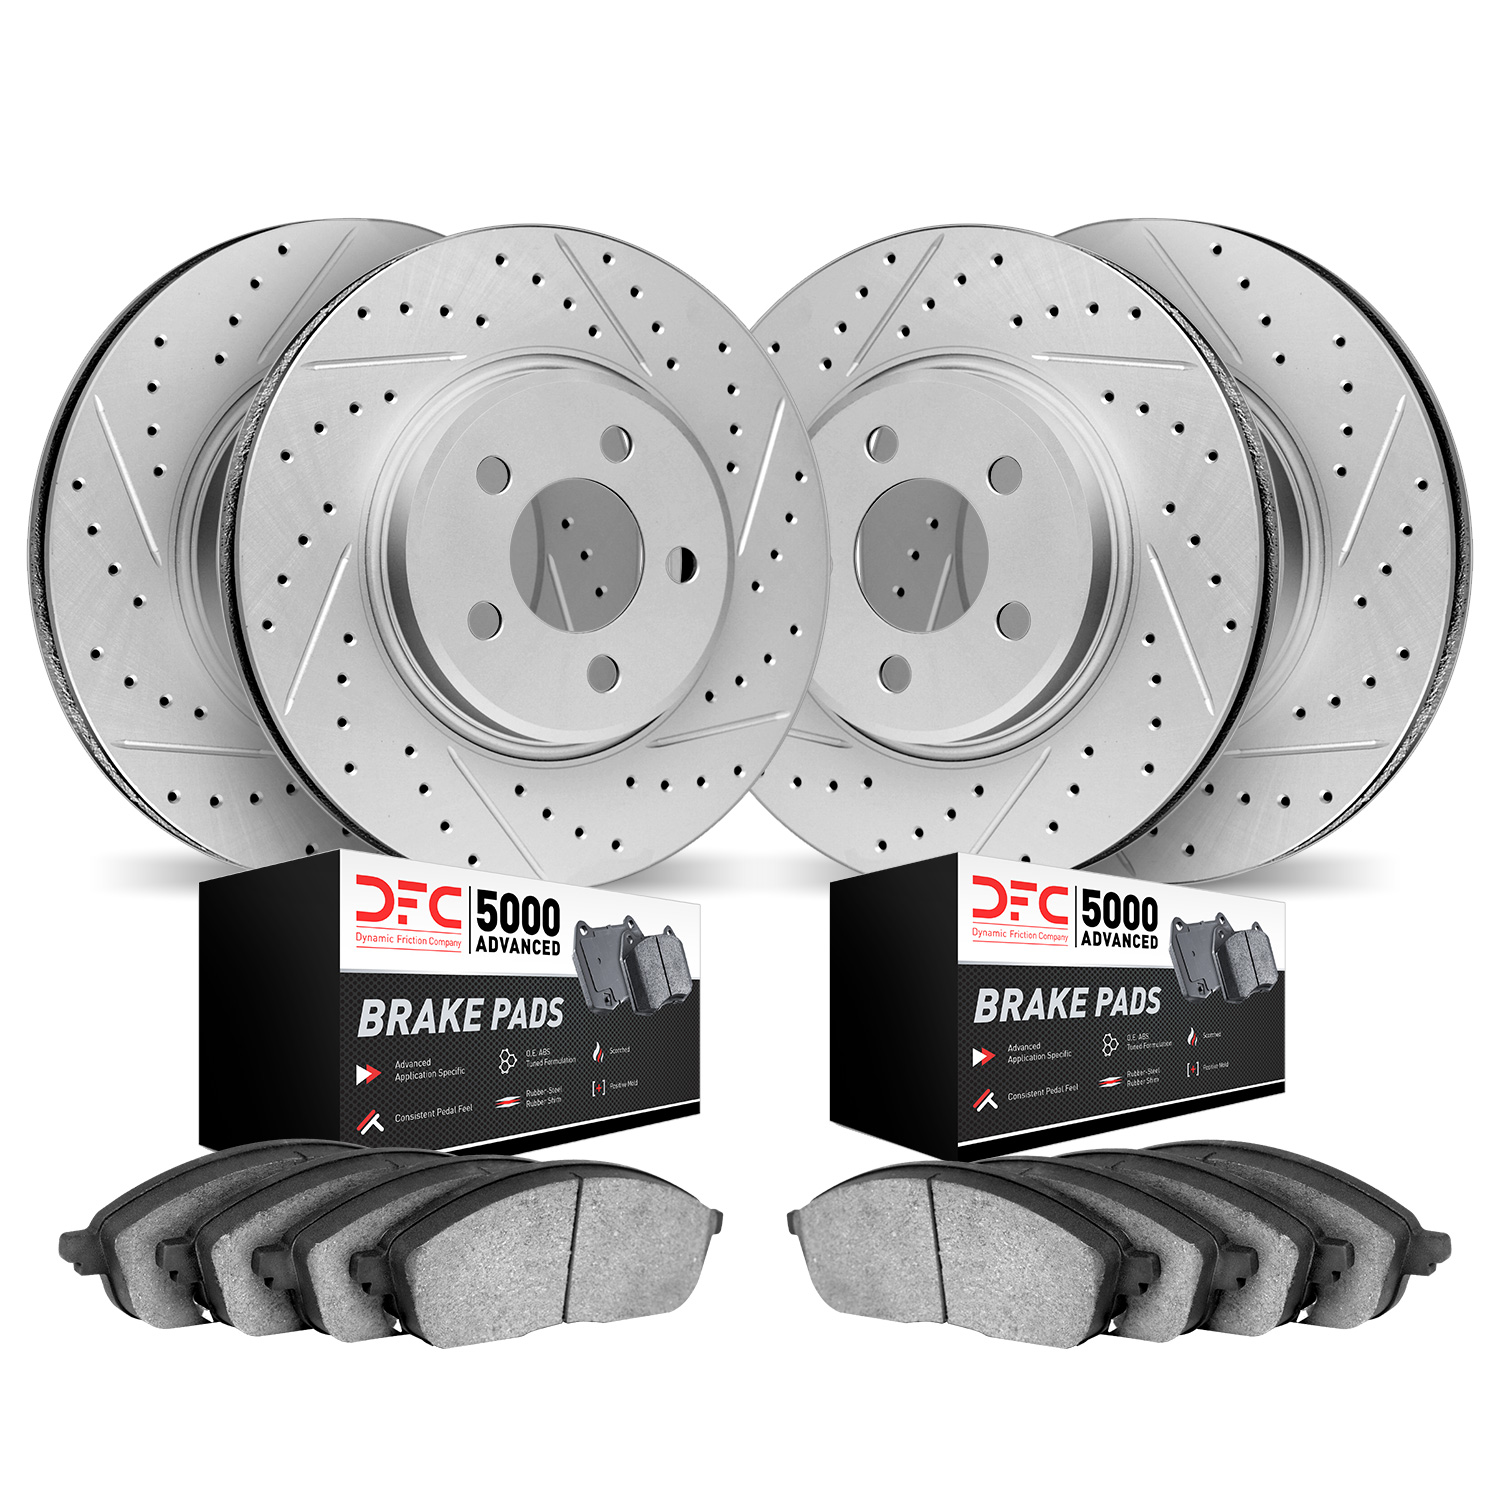 2504-46030 Geoperformance Drilled/Slotted Rotors w/5000 Advanced Brake Pads Kit, 2016-2019 GM, Position: Front and Rear